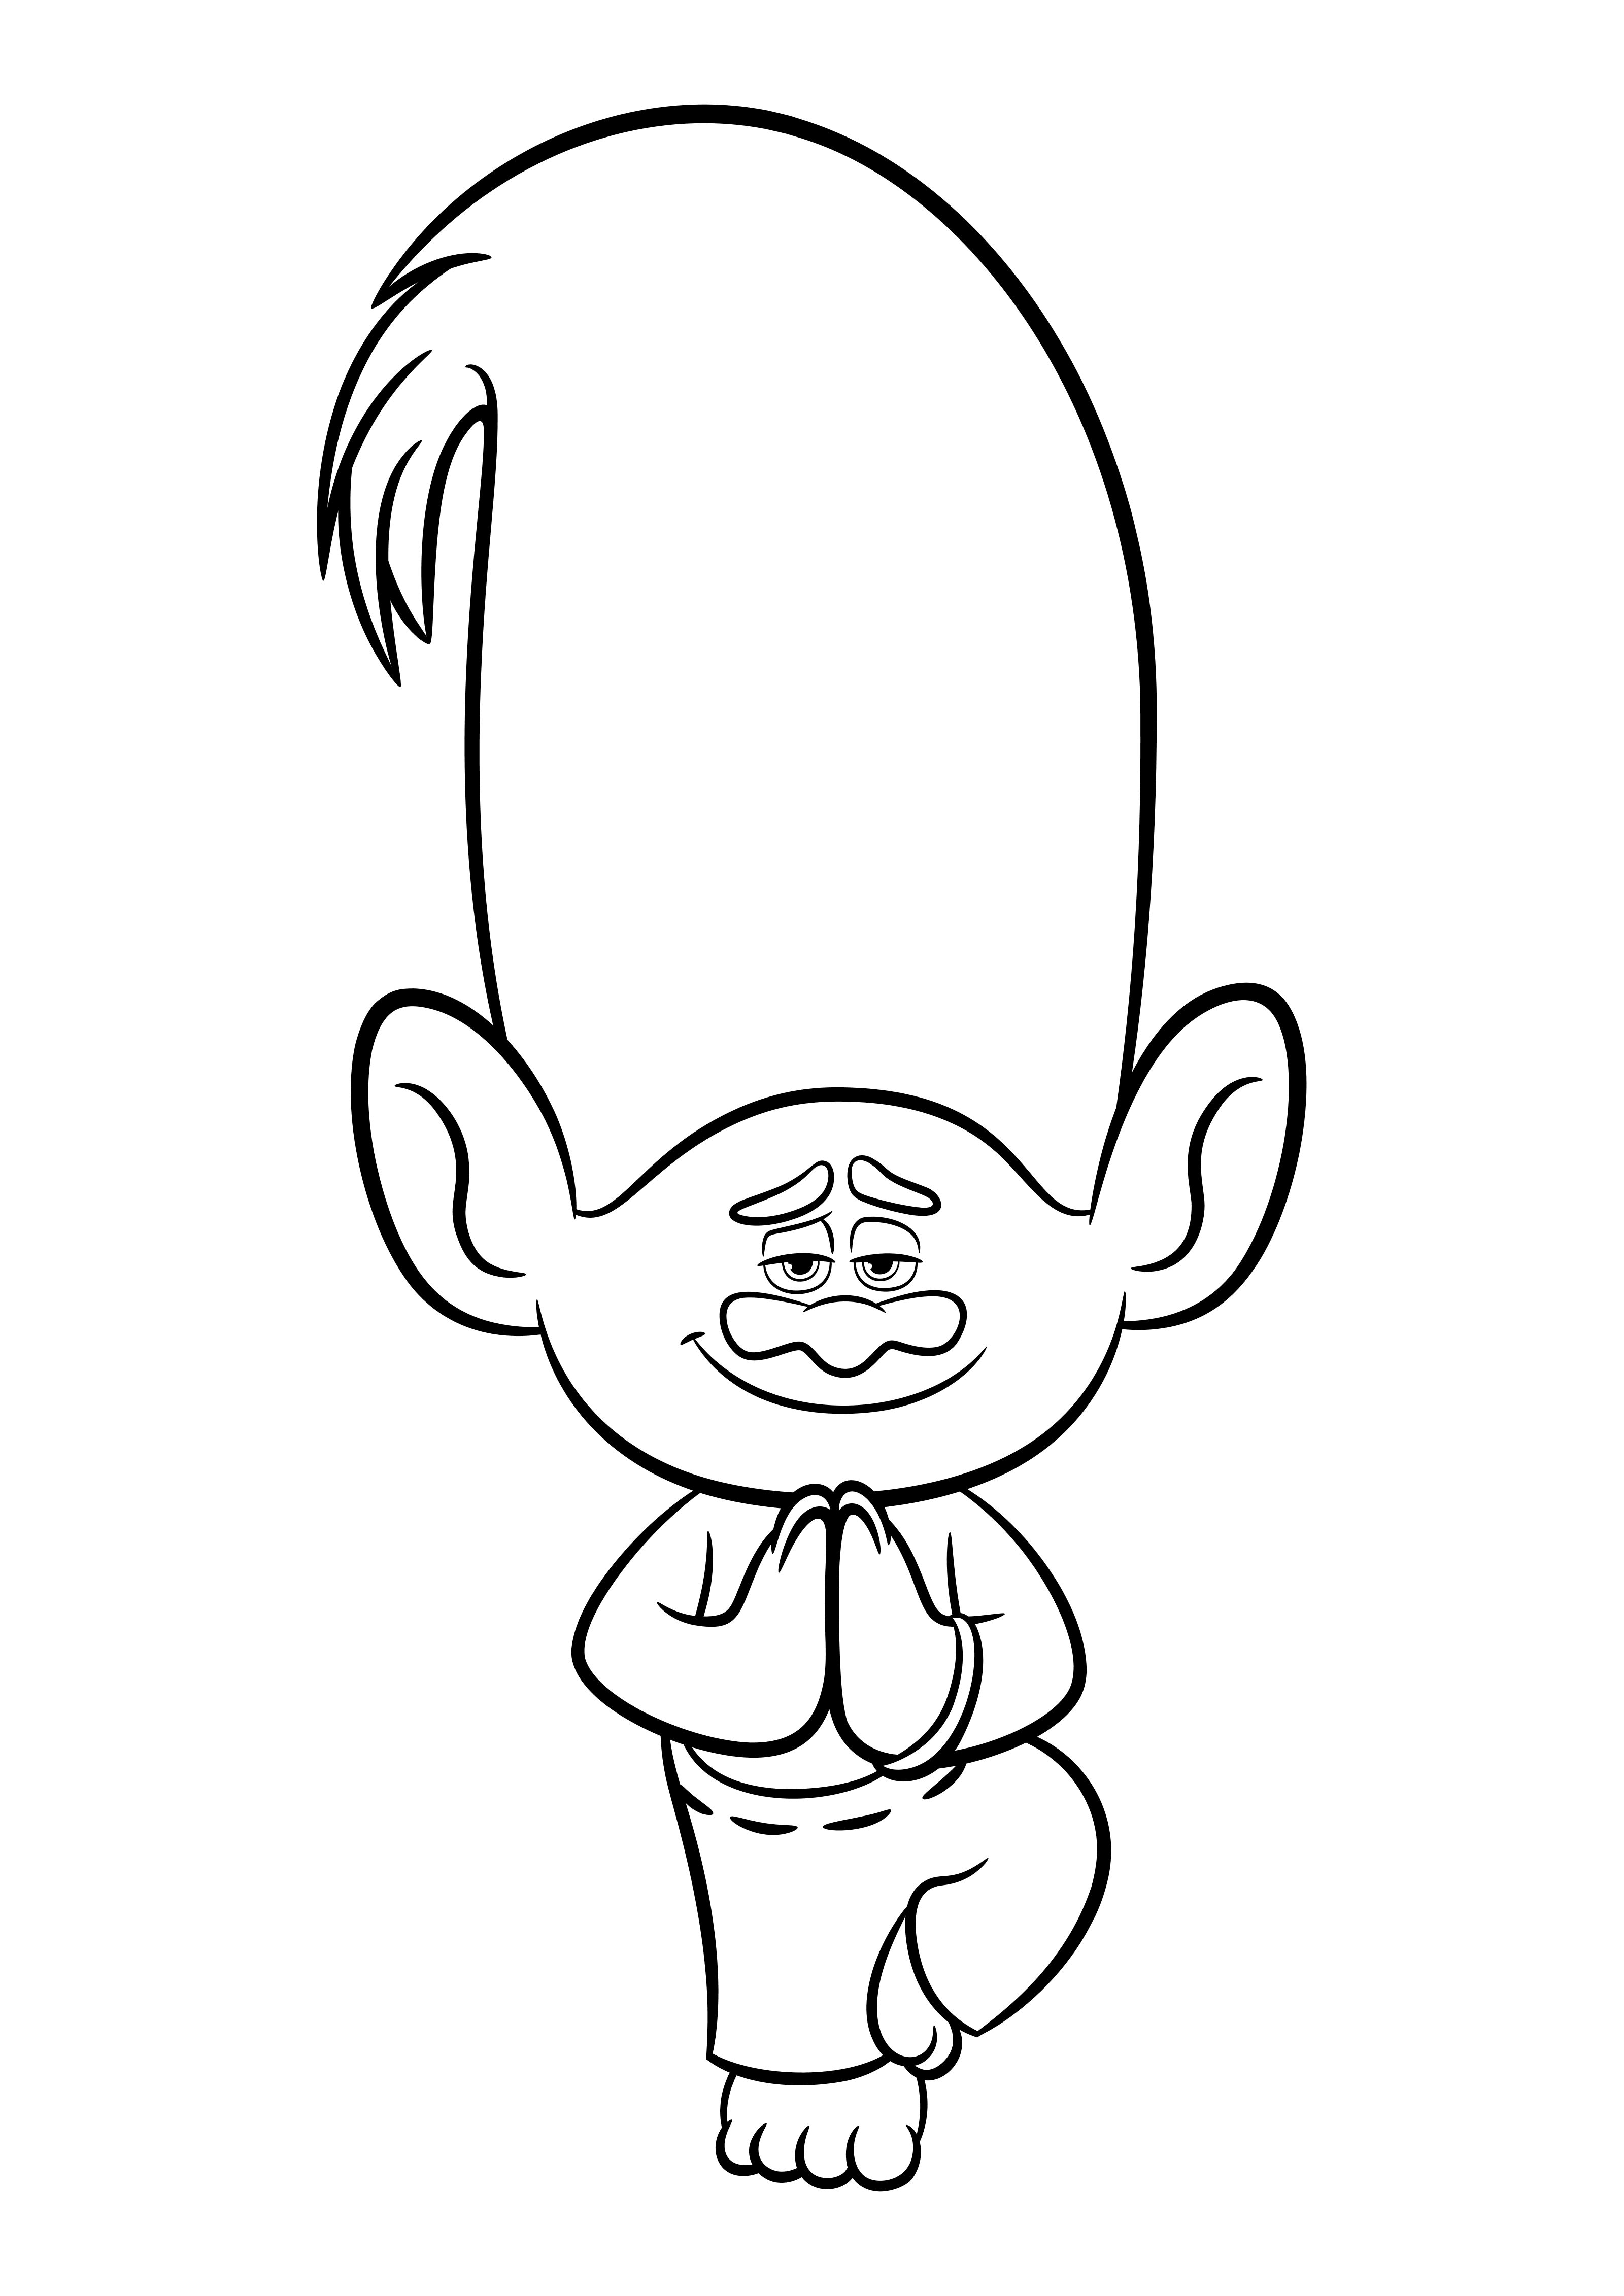 Trolls Coloring Pages To Download And Print For Free Poppy Coloring Page Coloring Pag